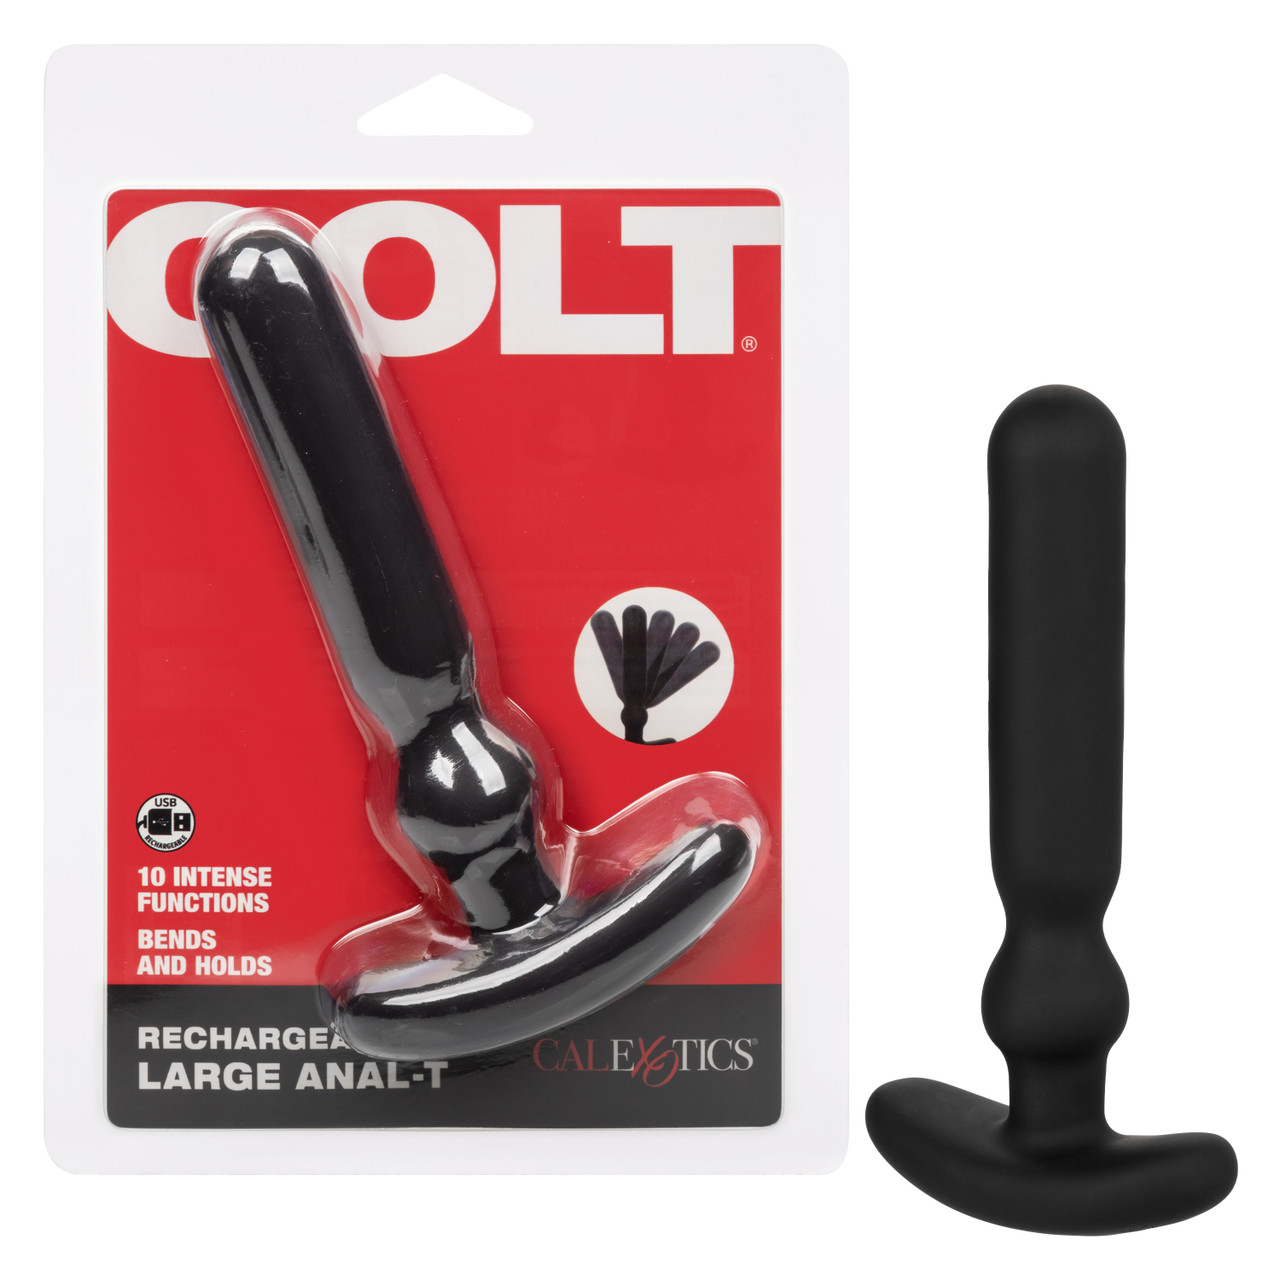 COLT RECHARGEABLE LARGE ANAL-T